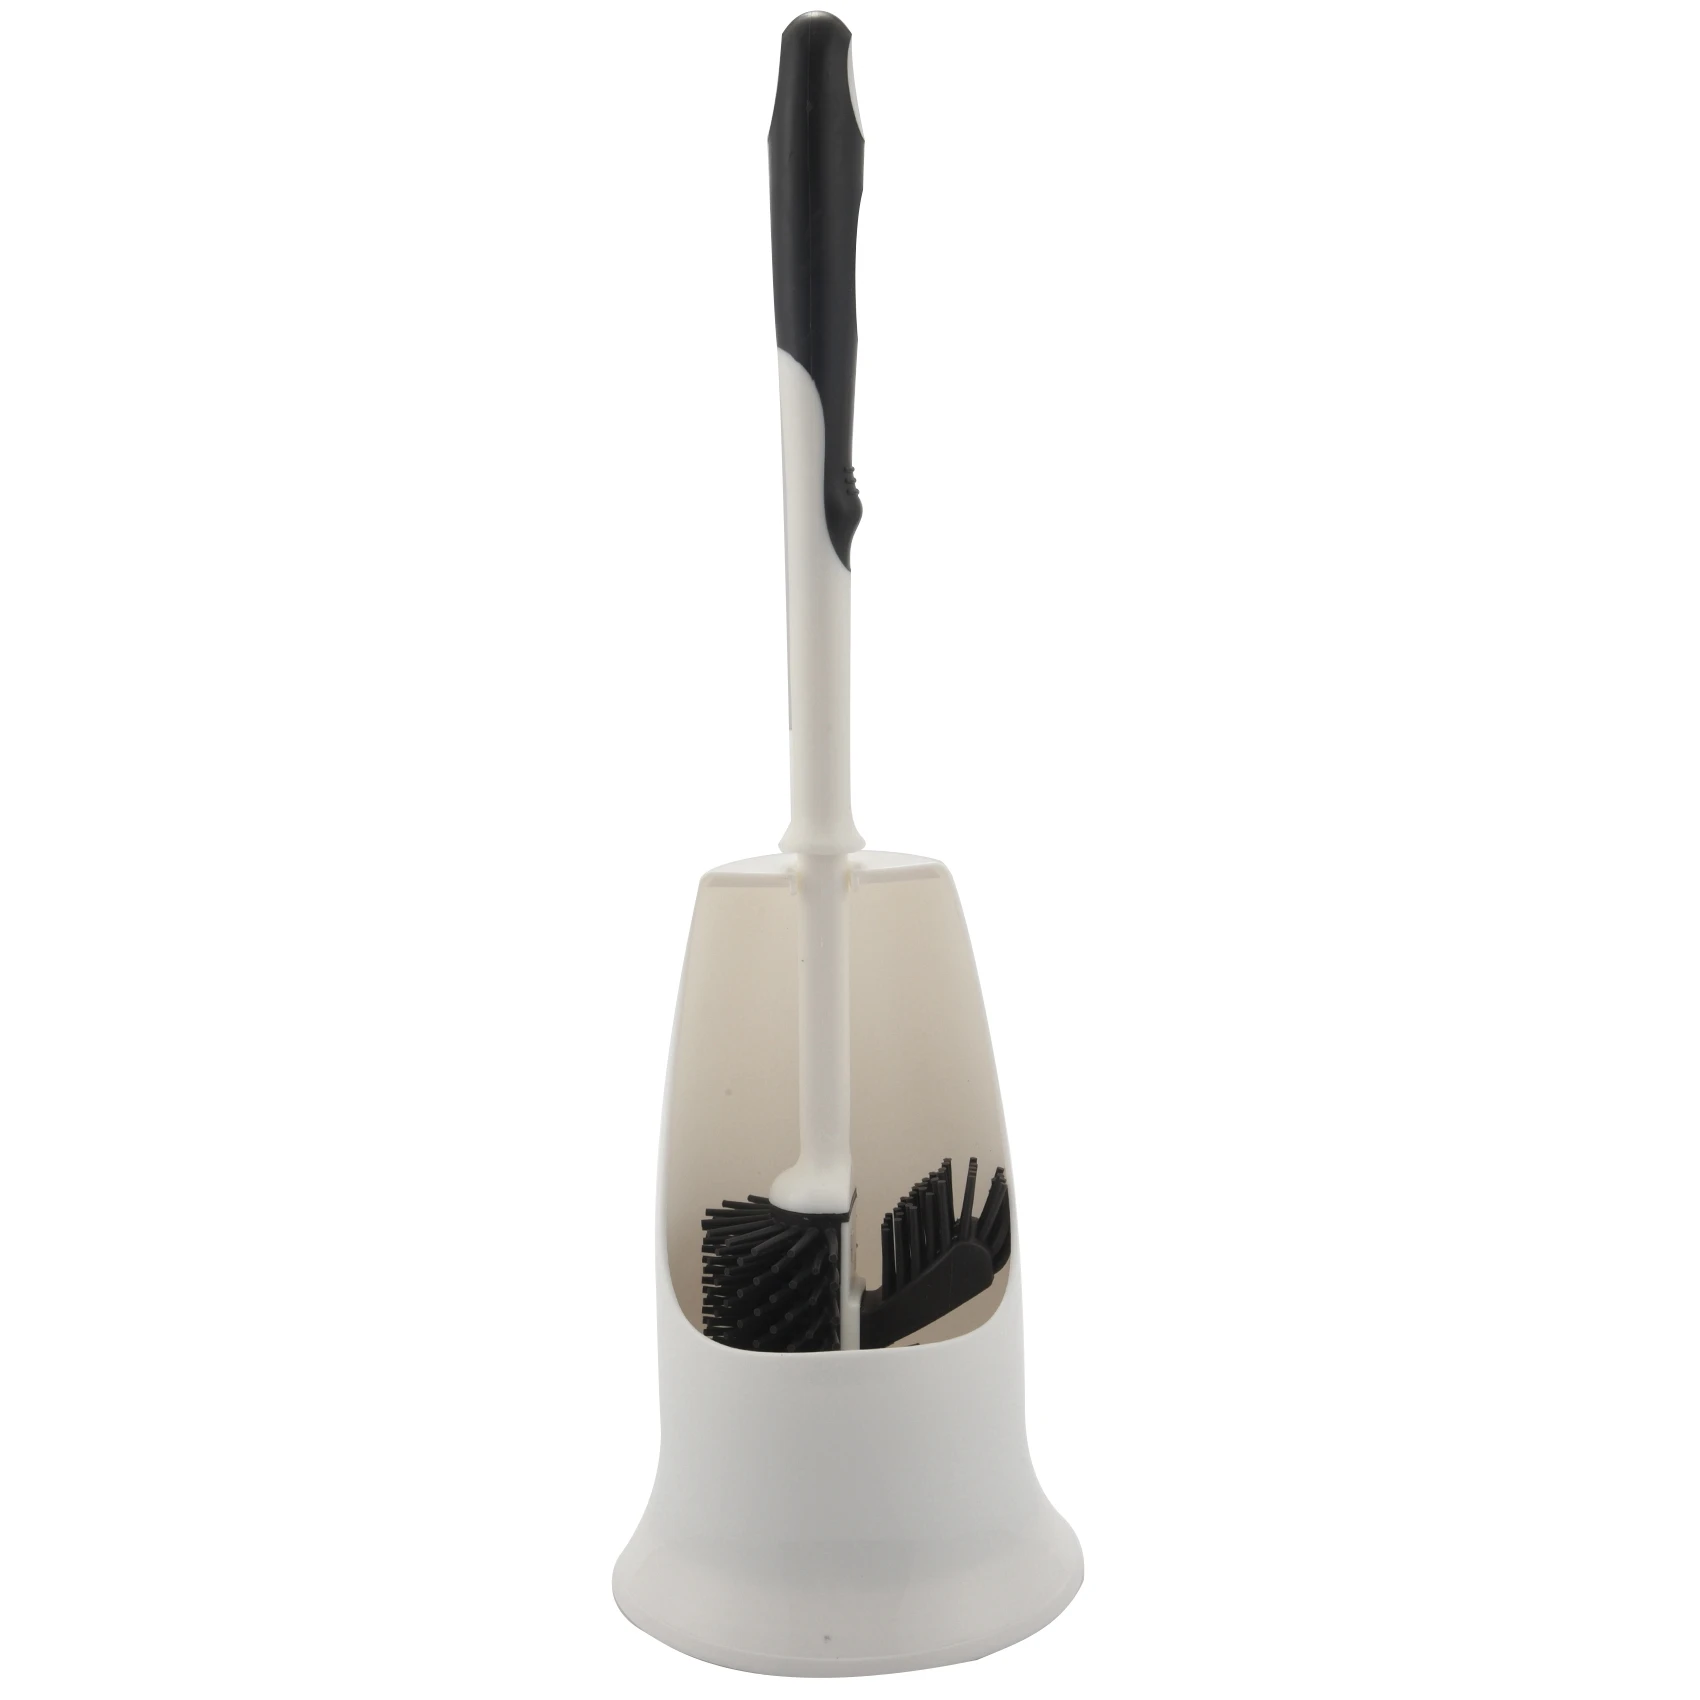 

Toilet Brush And Holder,Toilet Bowl Cleaning Brush Set,Under Rim Lip Brush And Storage Caddy For Bathroom